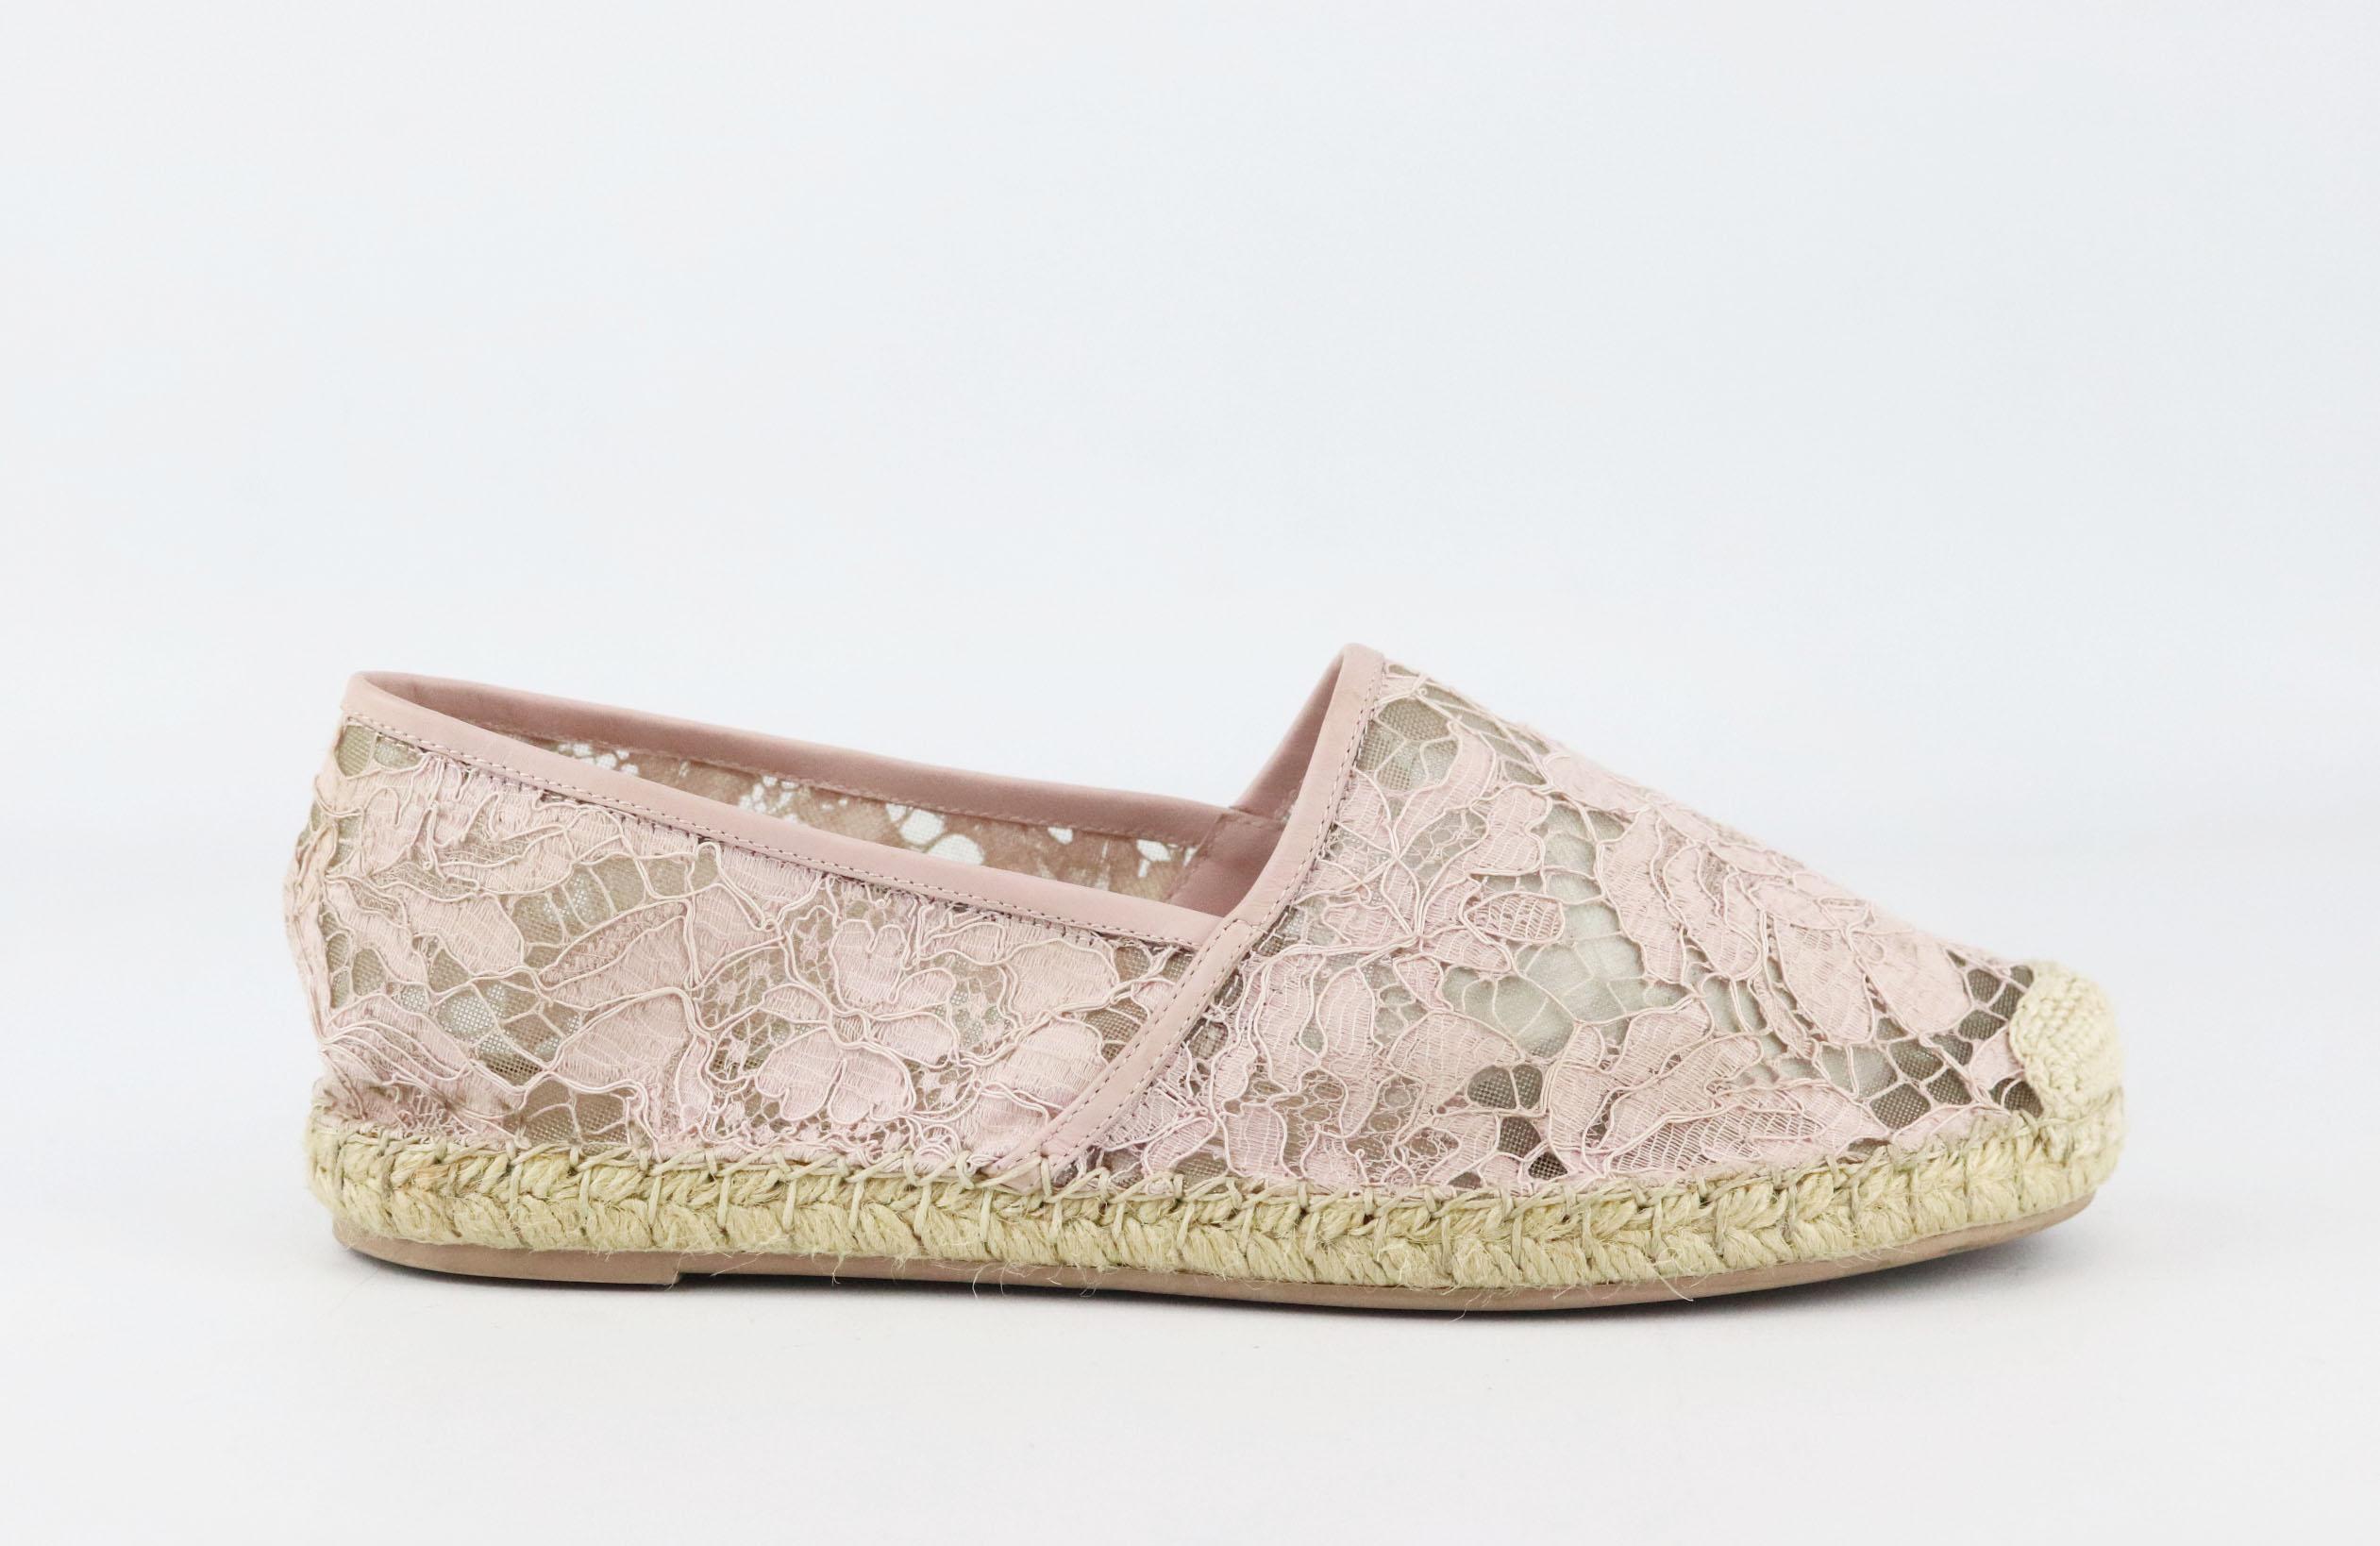 Valentino's hand-stitched lace and mesh espadrilles are among our favourite creations from the Valentino design duo, they are finished with a soft leather trim and jute soles.
Soles measures approximately 10 mm/ 0.5 inches.
Pink sheer lace-covered